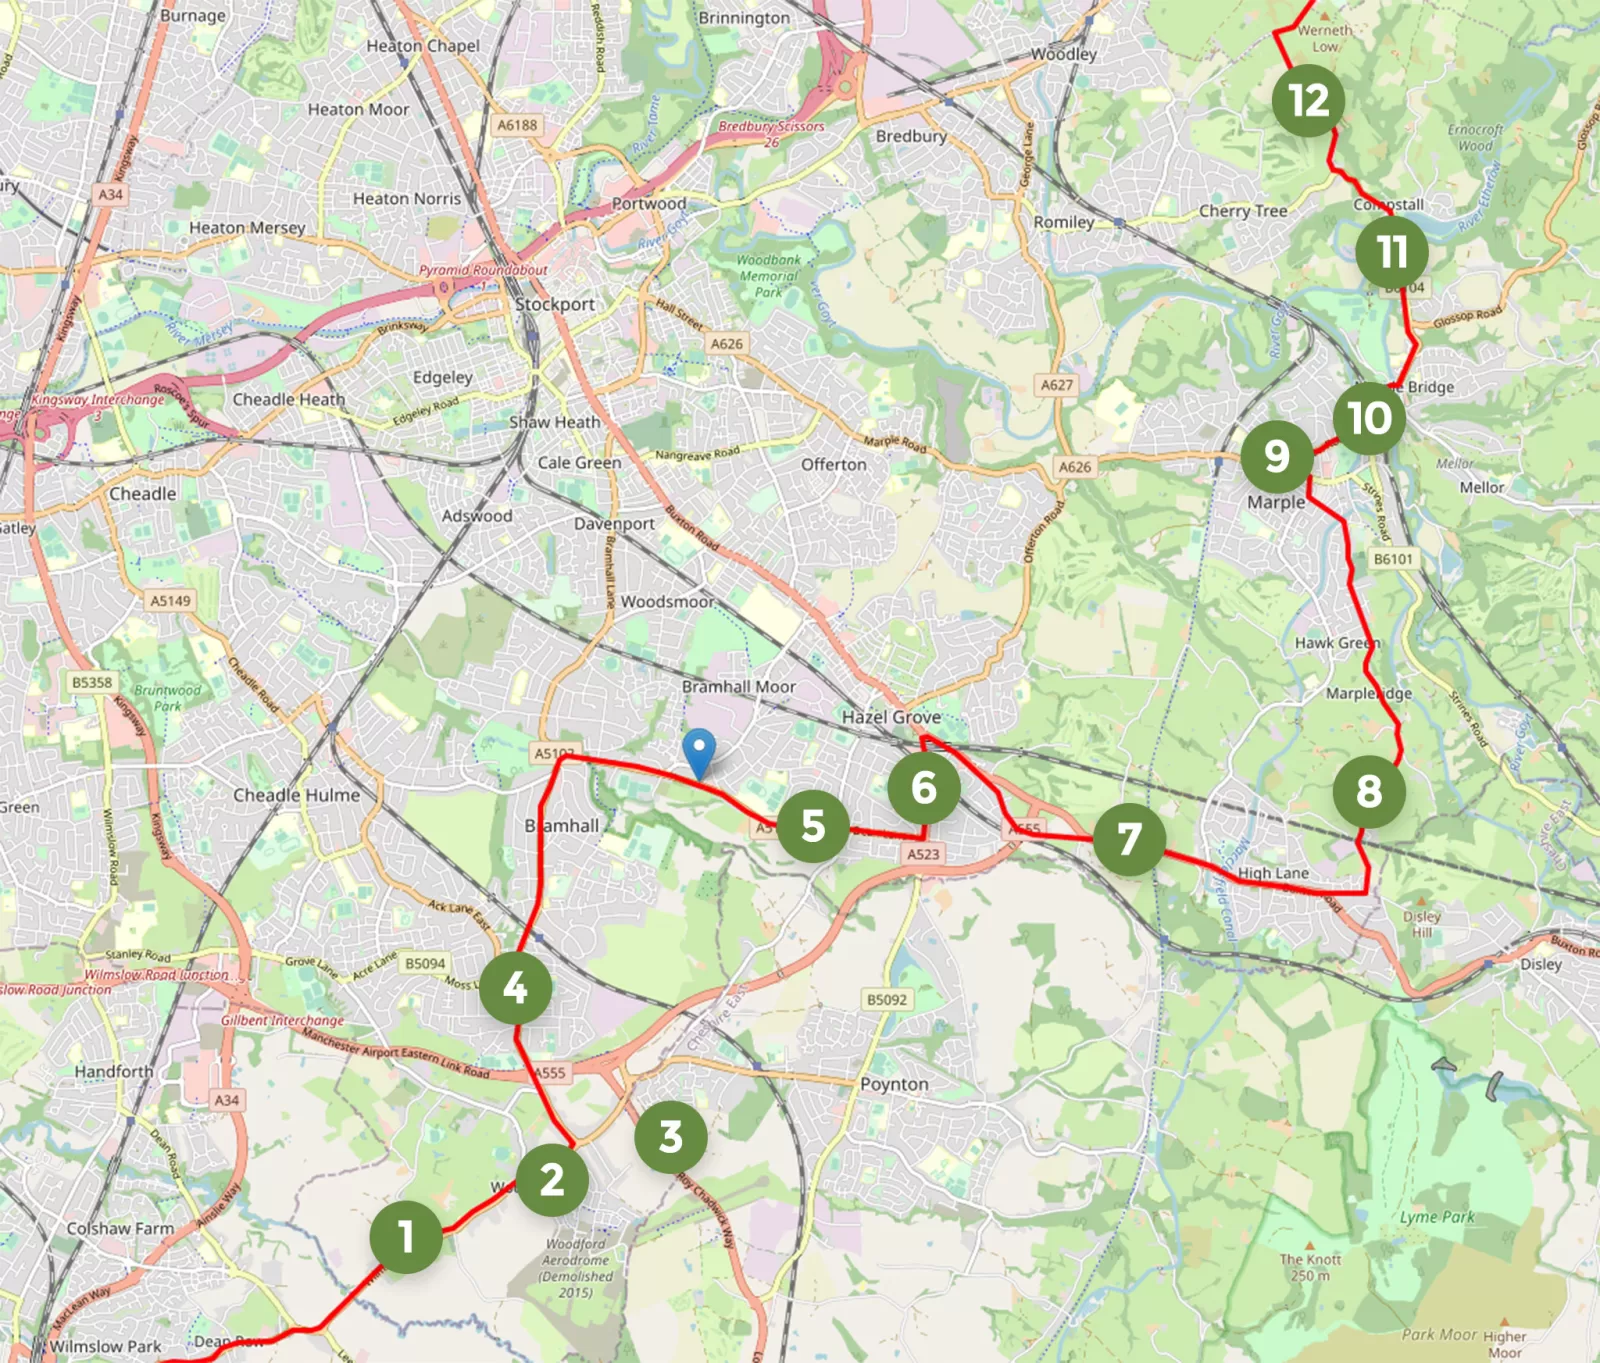 A map of the Tour of Britain 2023 route through Stockport, with numbers 1 to 12 for the identified "blackspots".